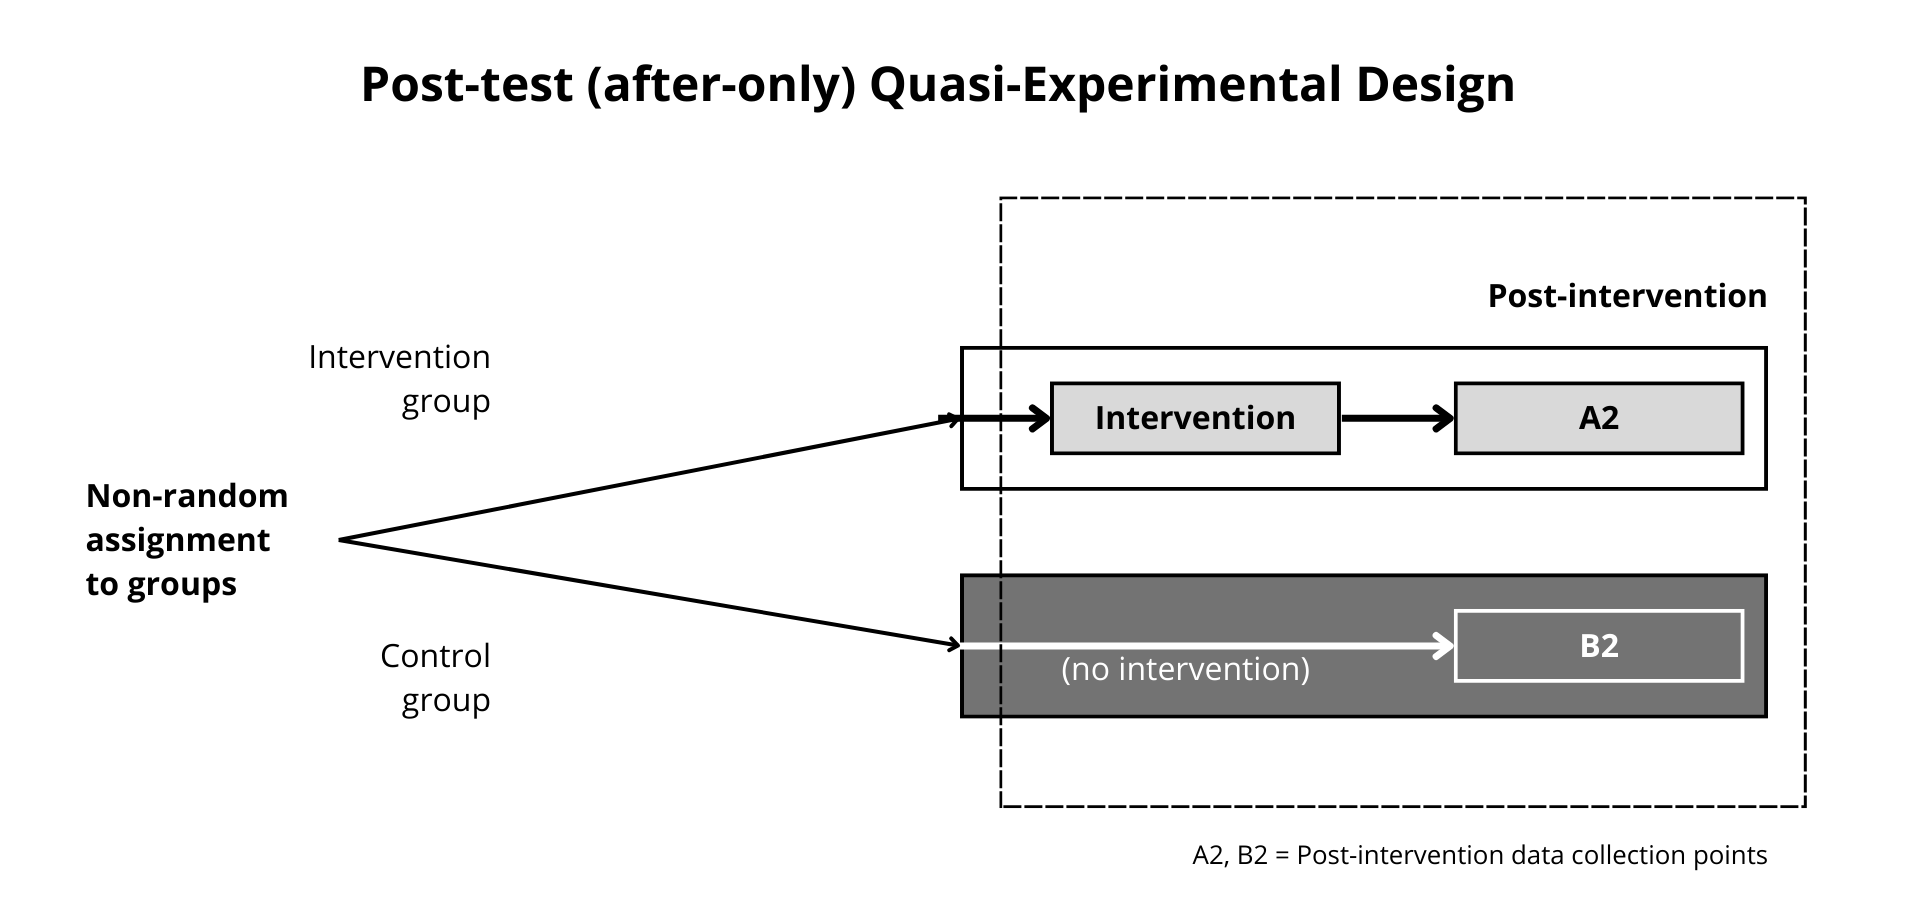 Figure 6. Post-Test Only Quasi-Experimental Design. Adapted from https://www.k4health.org/toolkits/measuring-success/types-evaluation-designs